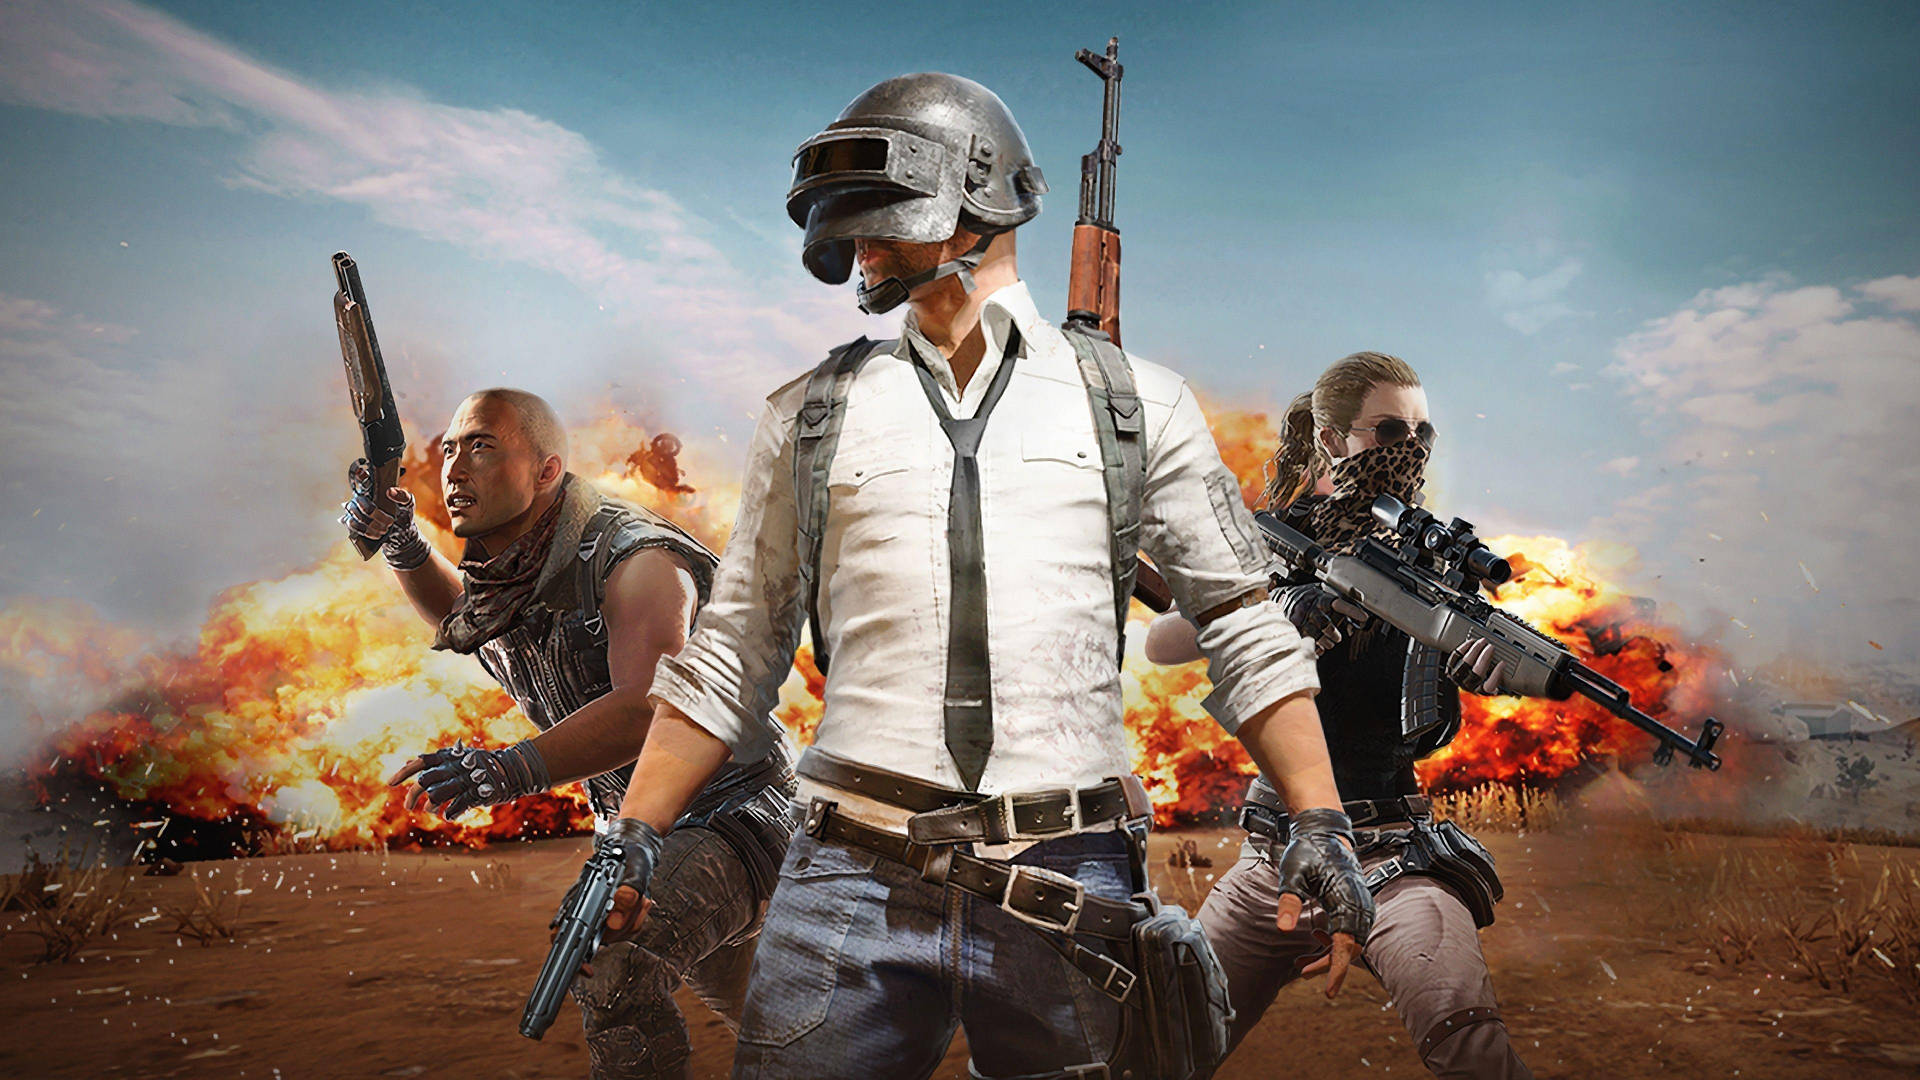 Pubg Hd Helmet Character And Other Players Explosion Background